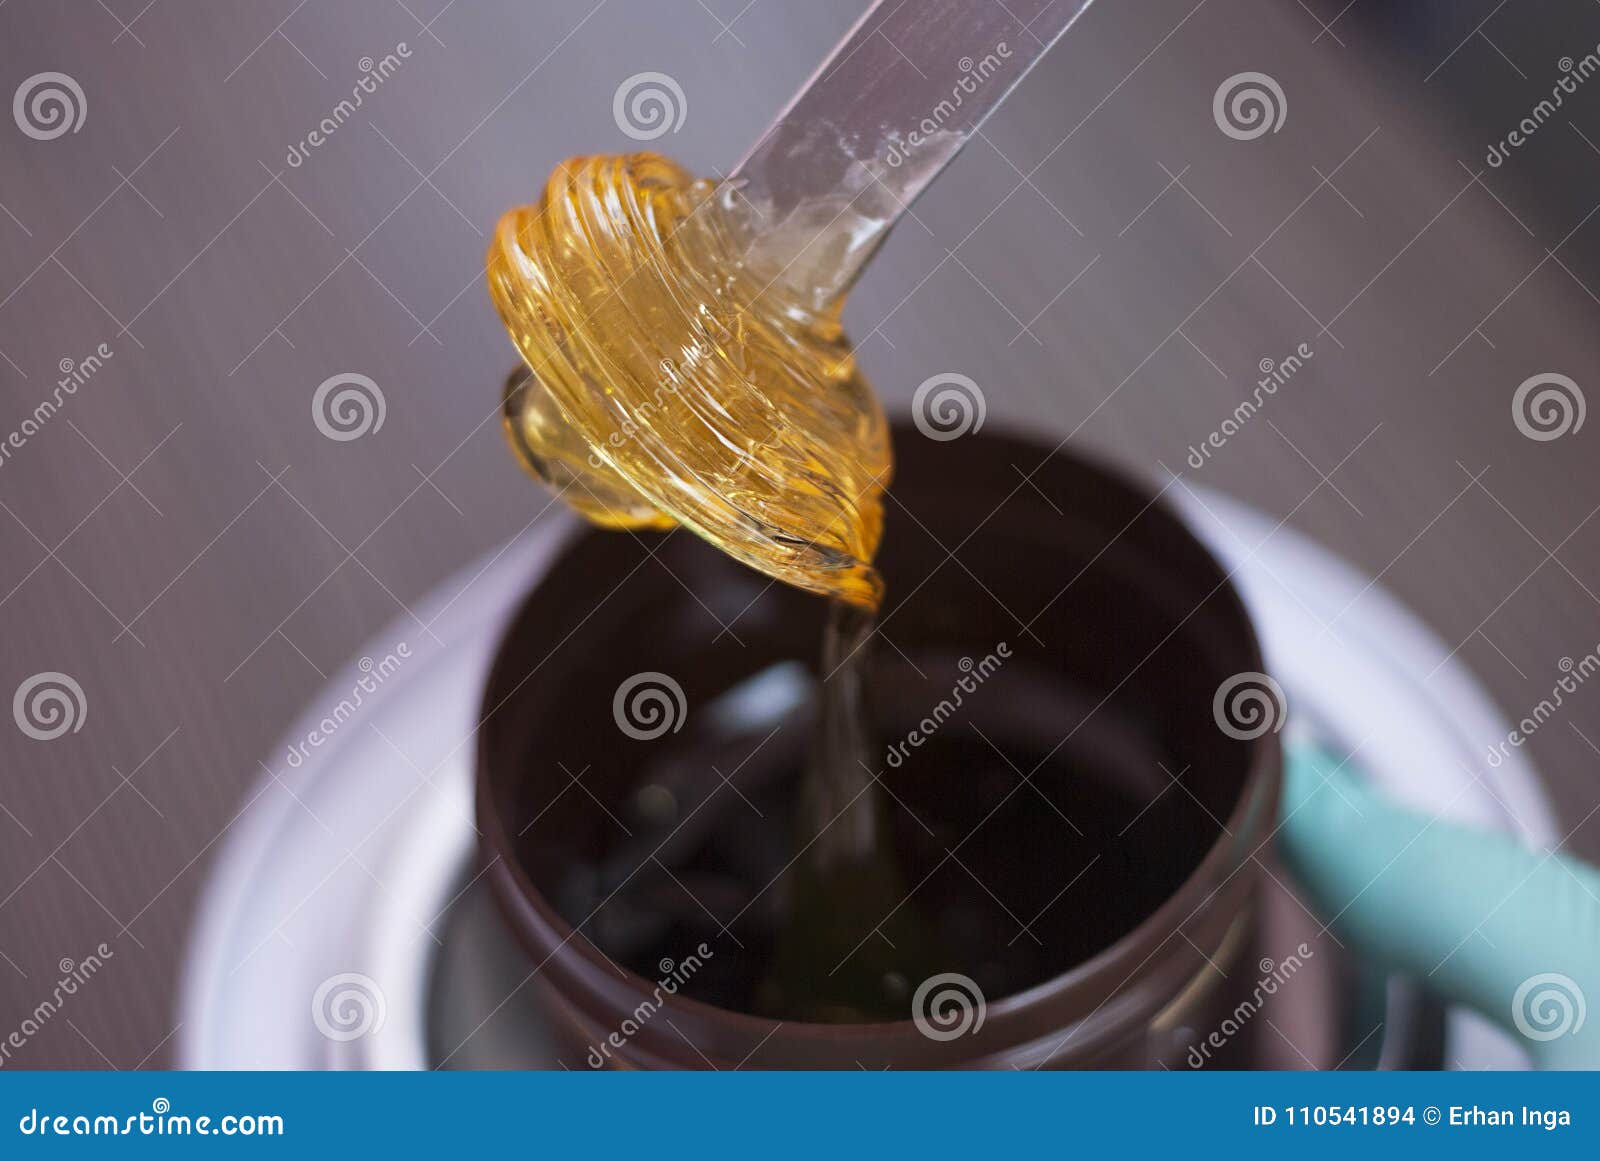 a women takes out from the jar a pasta for a sugaring, yellow color. depilatory sugar paste. beauty and cosmetics.